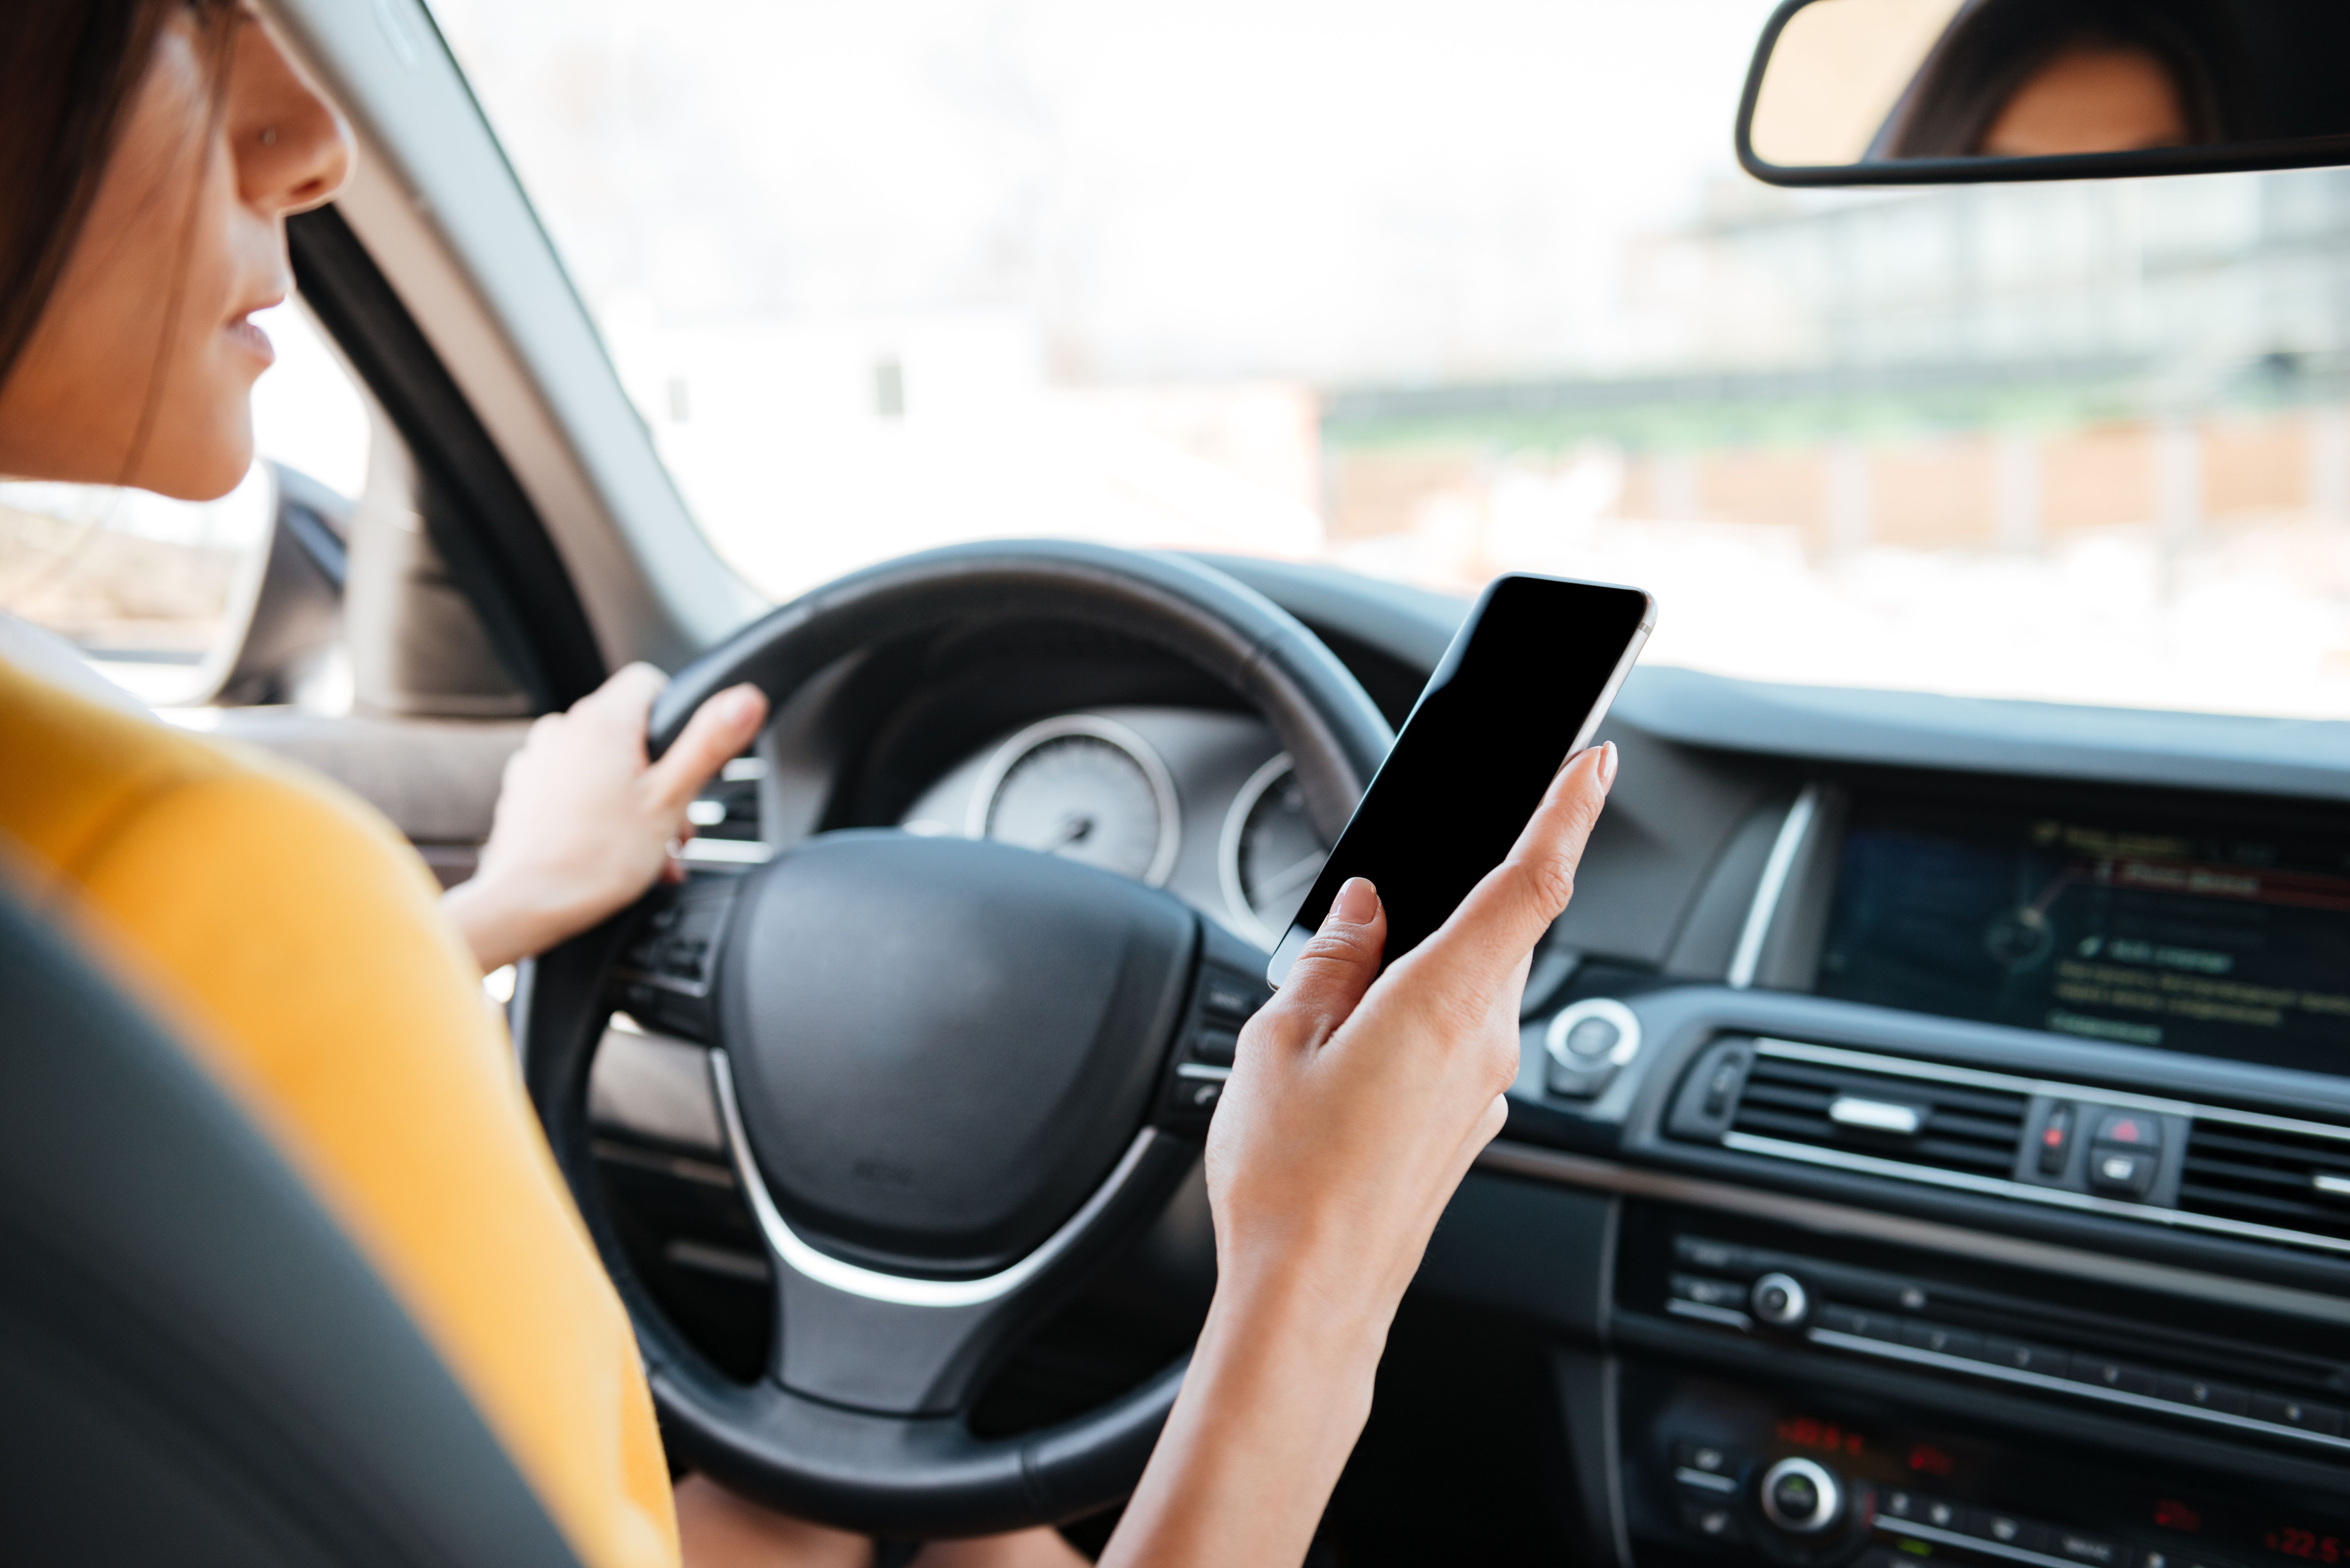 2017 Data Statistics on Cell Phone Use and driving accidents